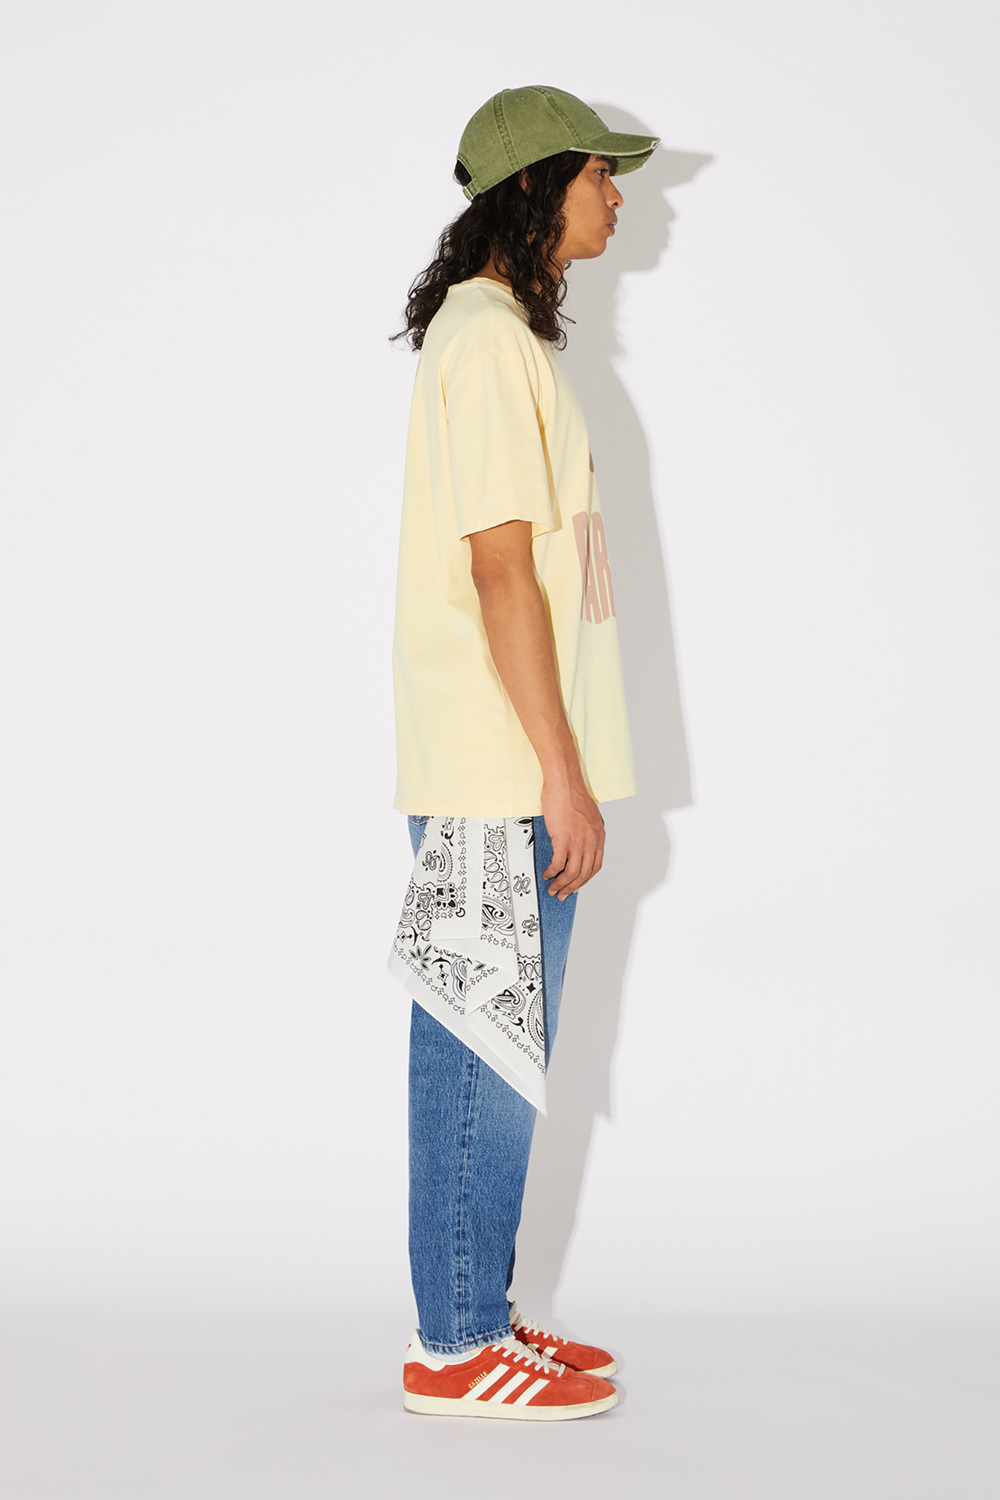 AMISH: CREW NECK T-SHIRT WITH STAY PARANOID PRINT